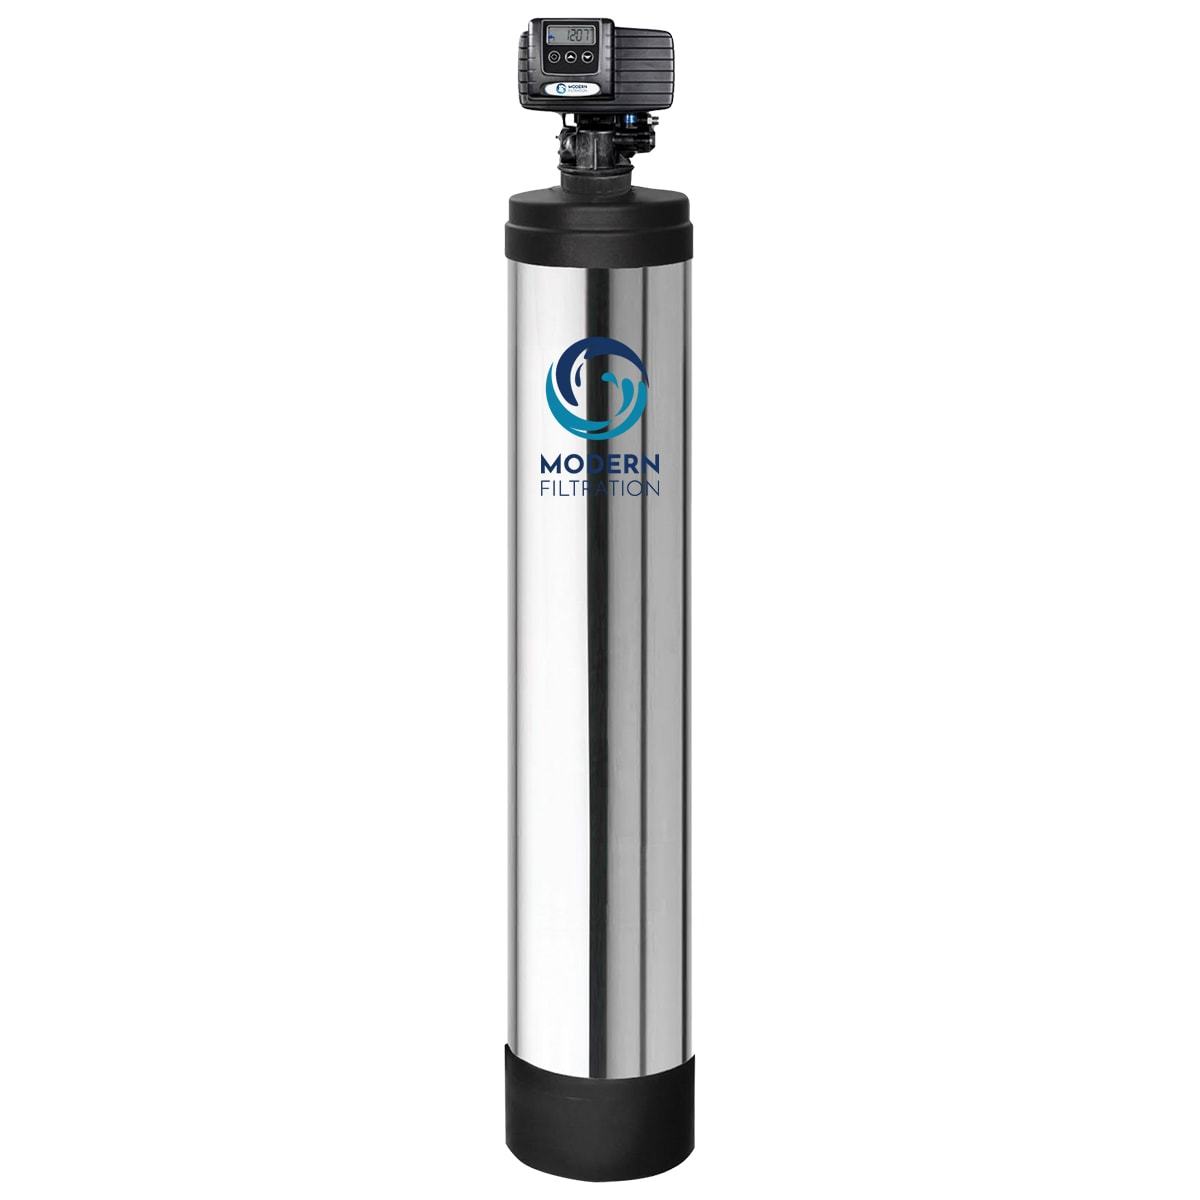 Modern Filtration Premier 6-Stage Air-Injected Whole House Well Water Filtration and Conditioning System